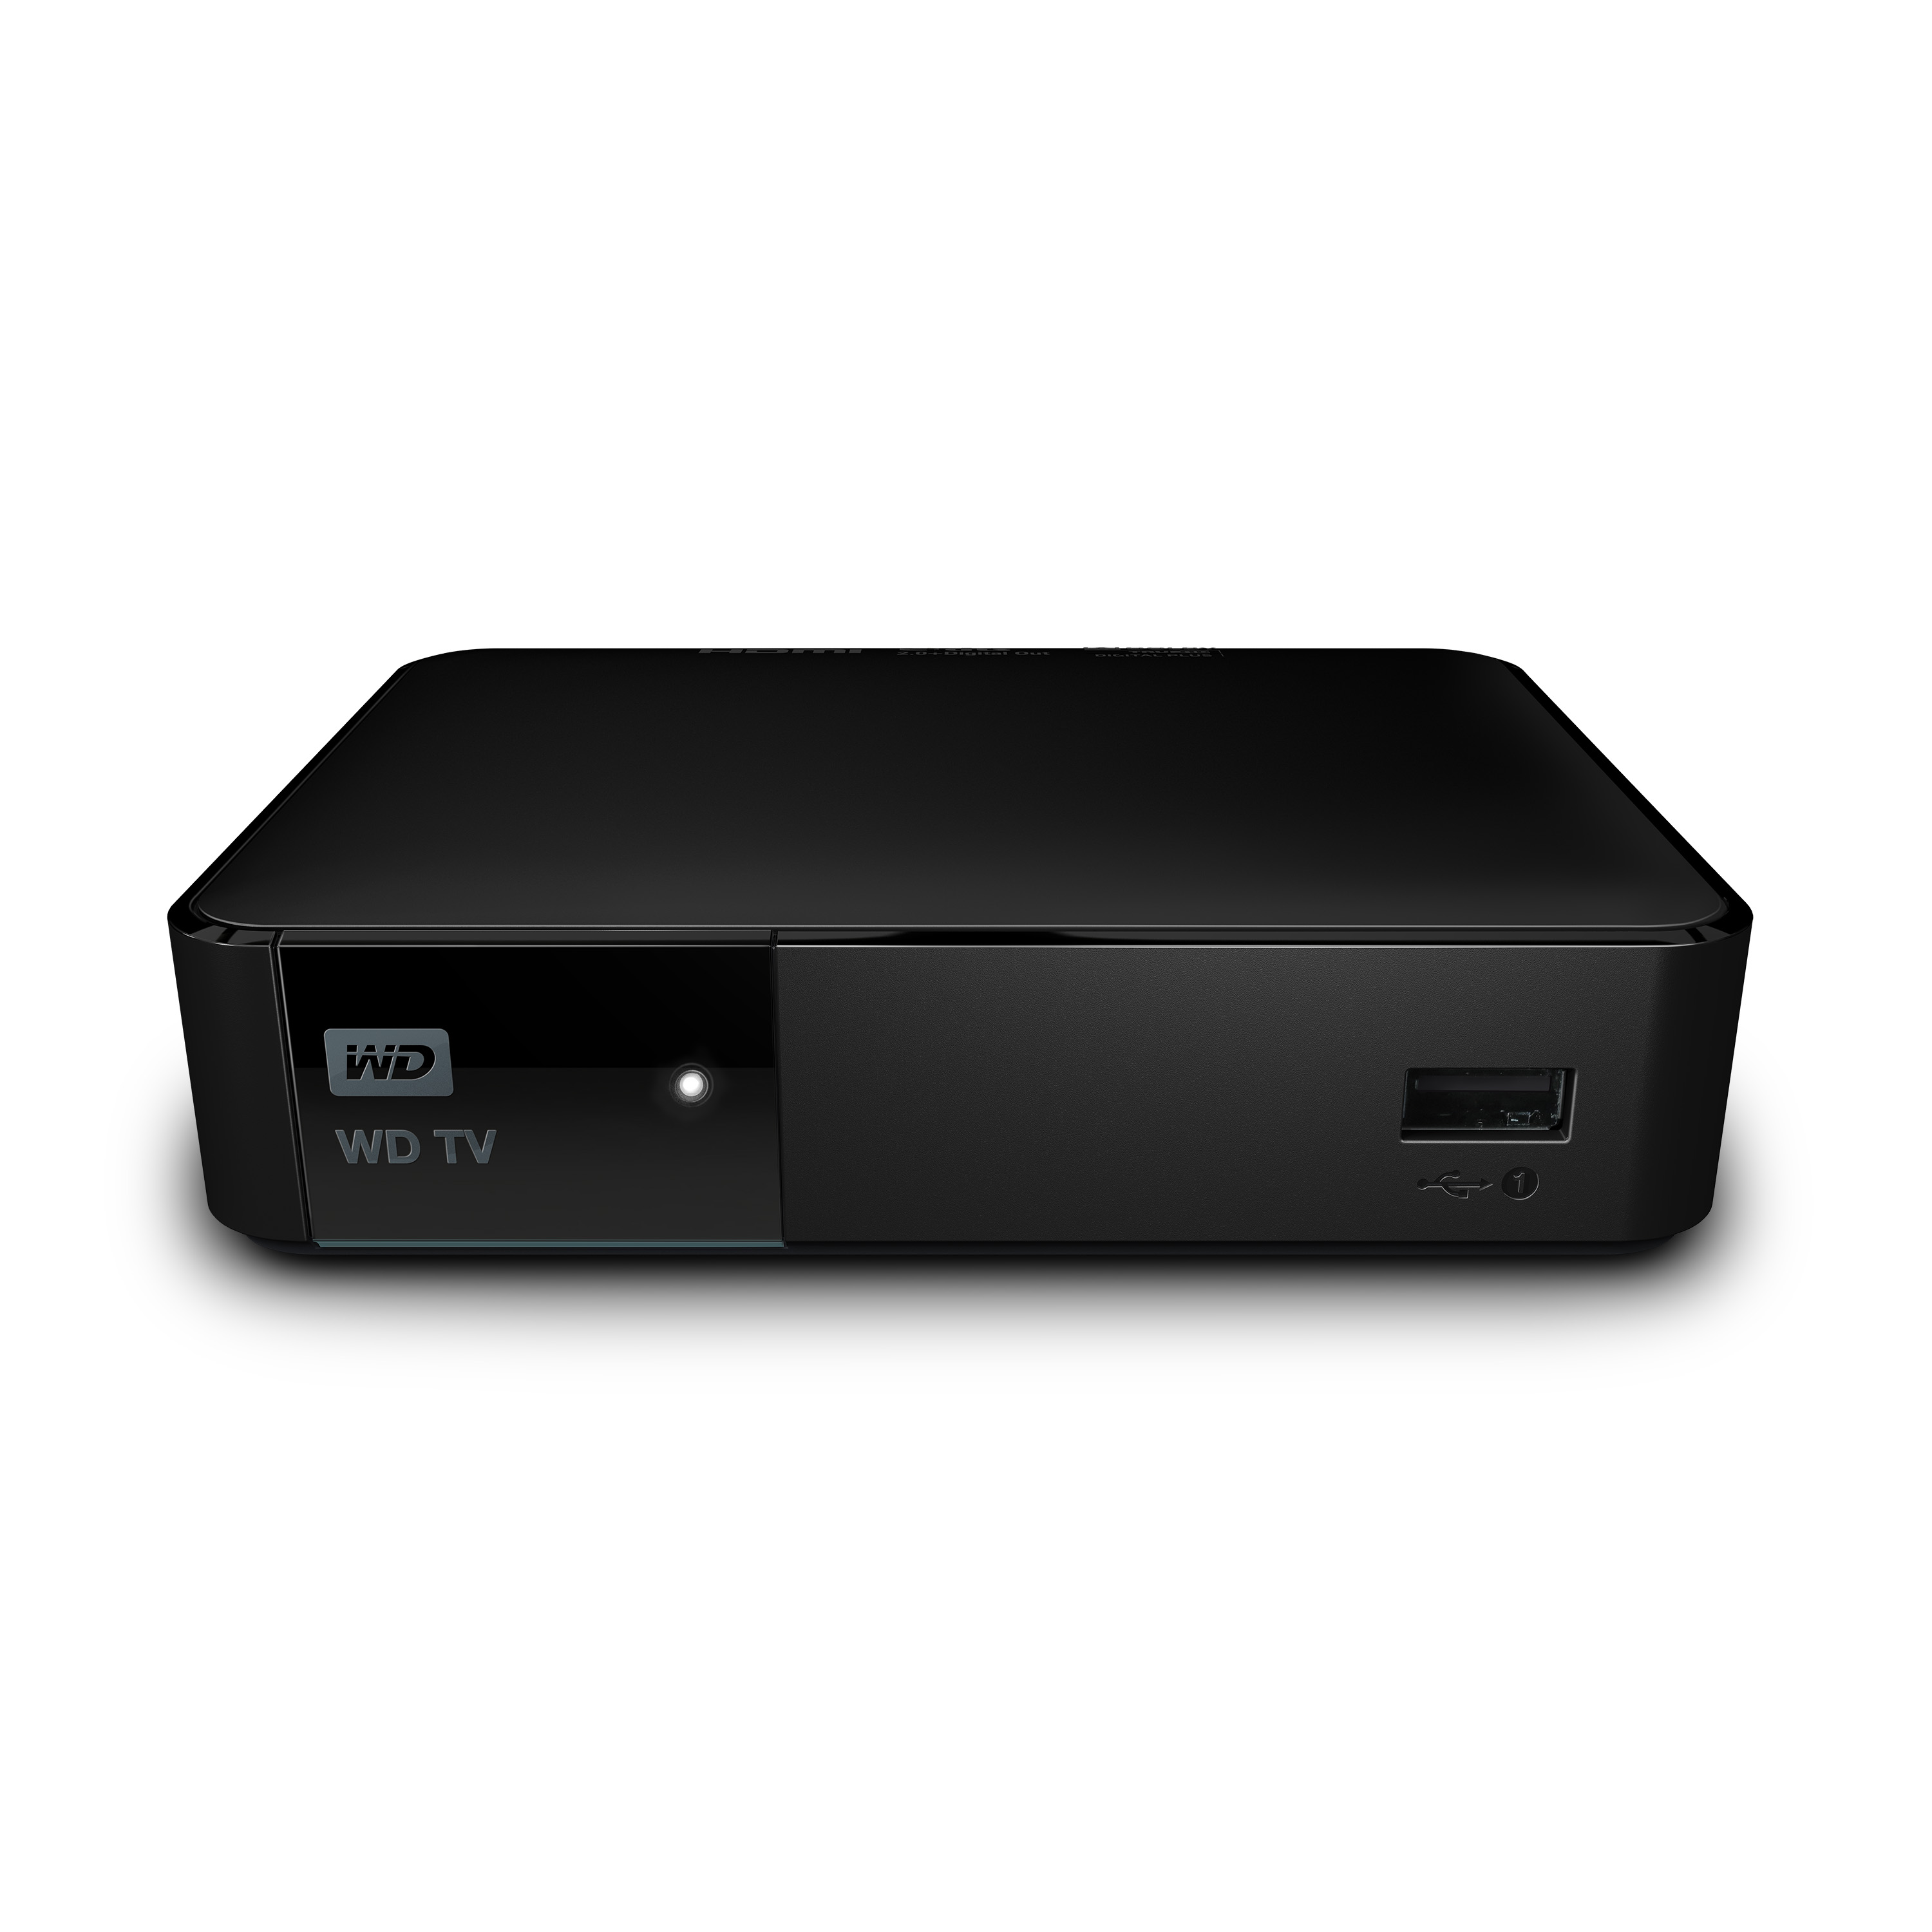 WD TV front image